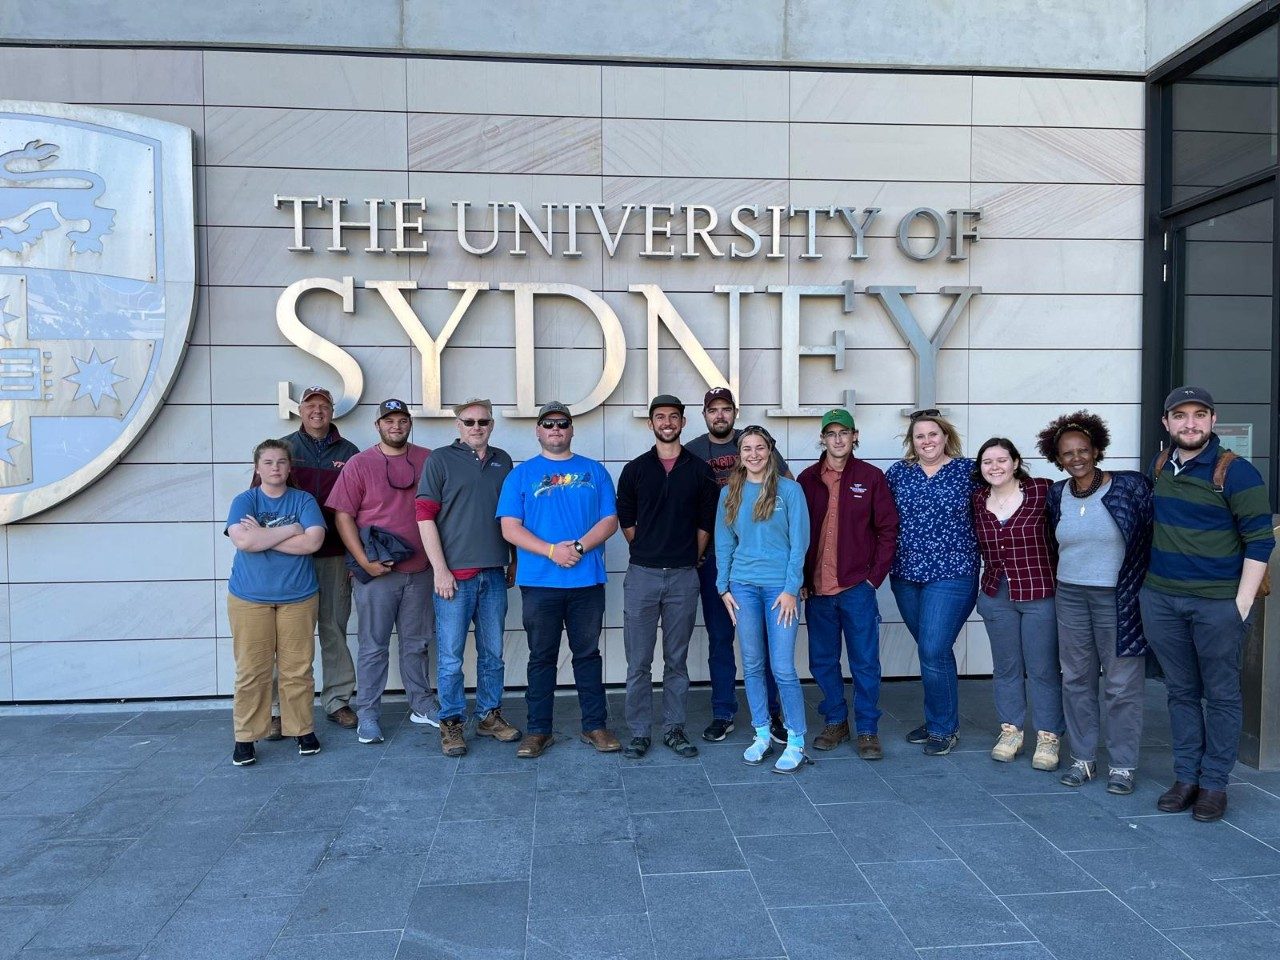 Students at the University of Sydney.